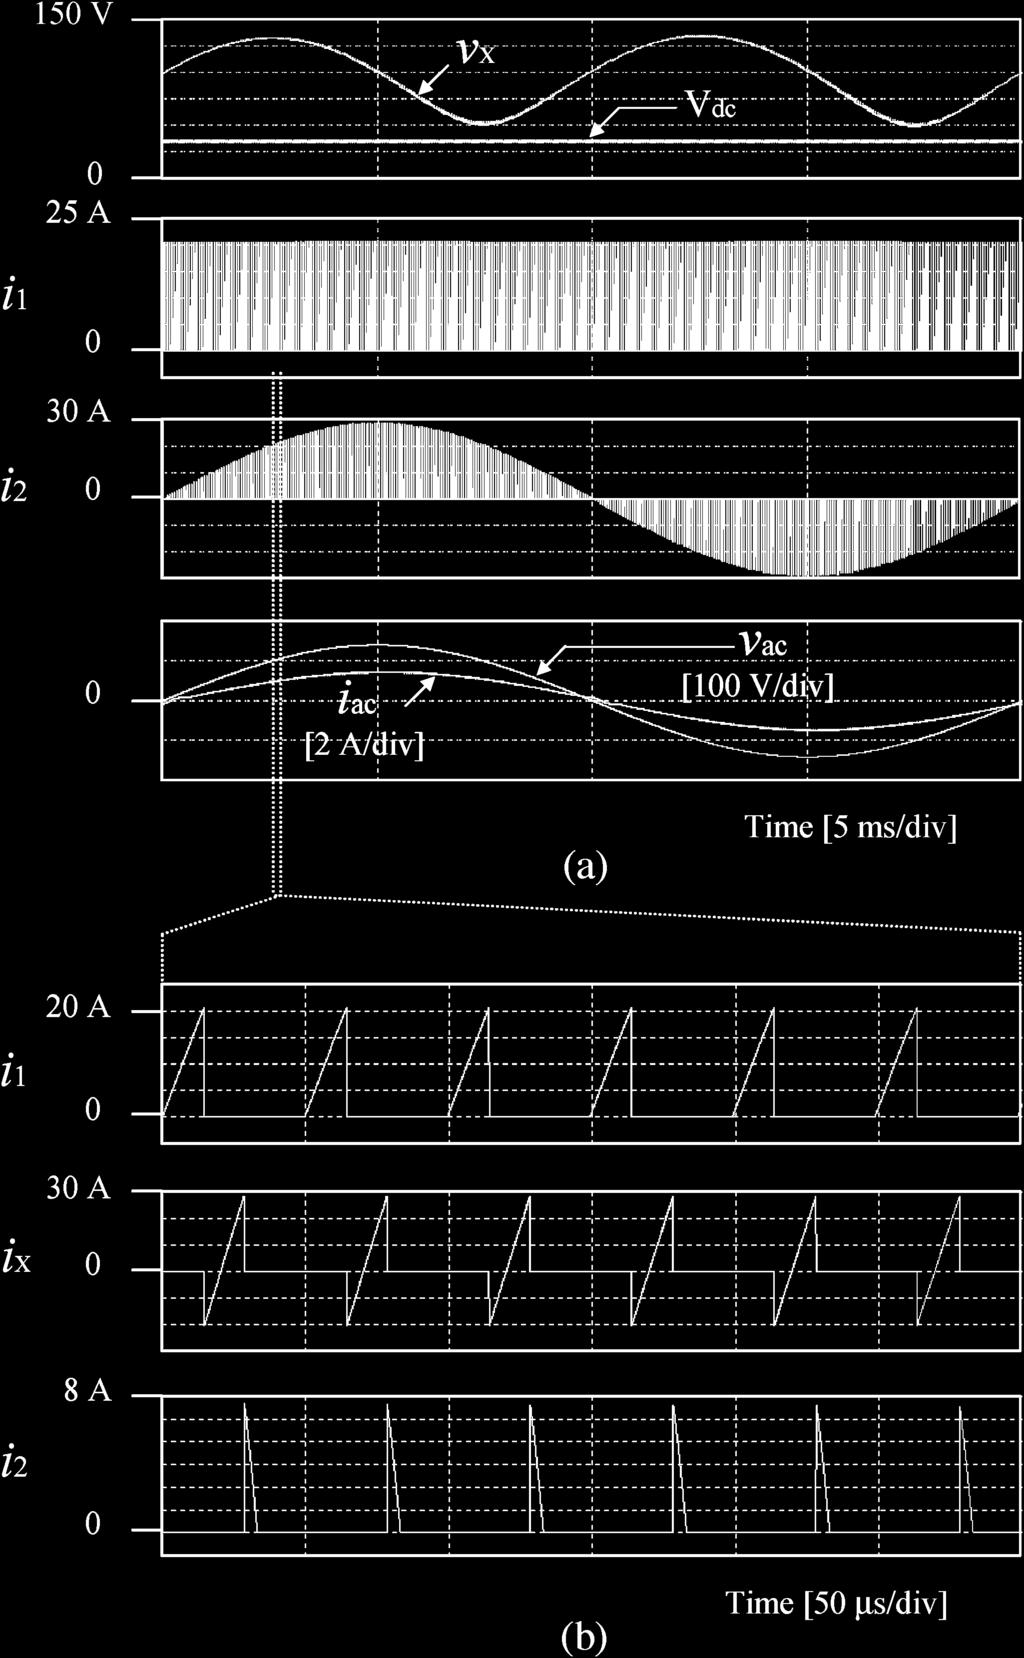 1270 IEEE TRANSACTIONS ON POWER ELECTRONICS, VOL. 21, NO. 5, SEPTEMBER 2006 Fig. 14. External view of the prototype ac module inverter. Fig. 13. Simulation waveforms.